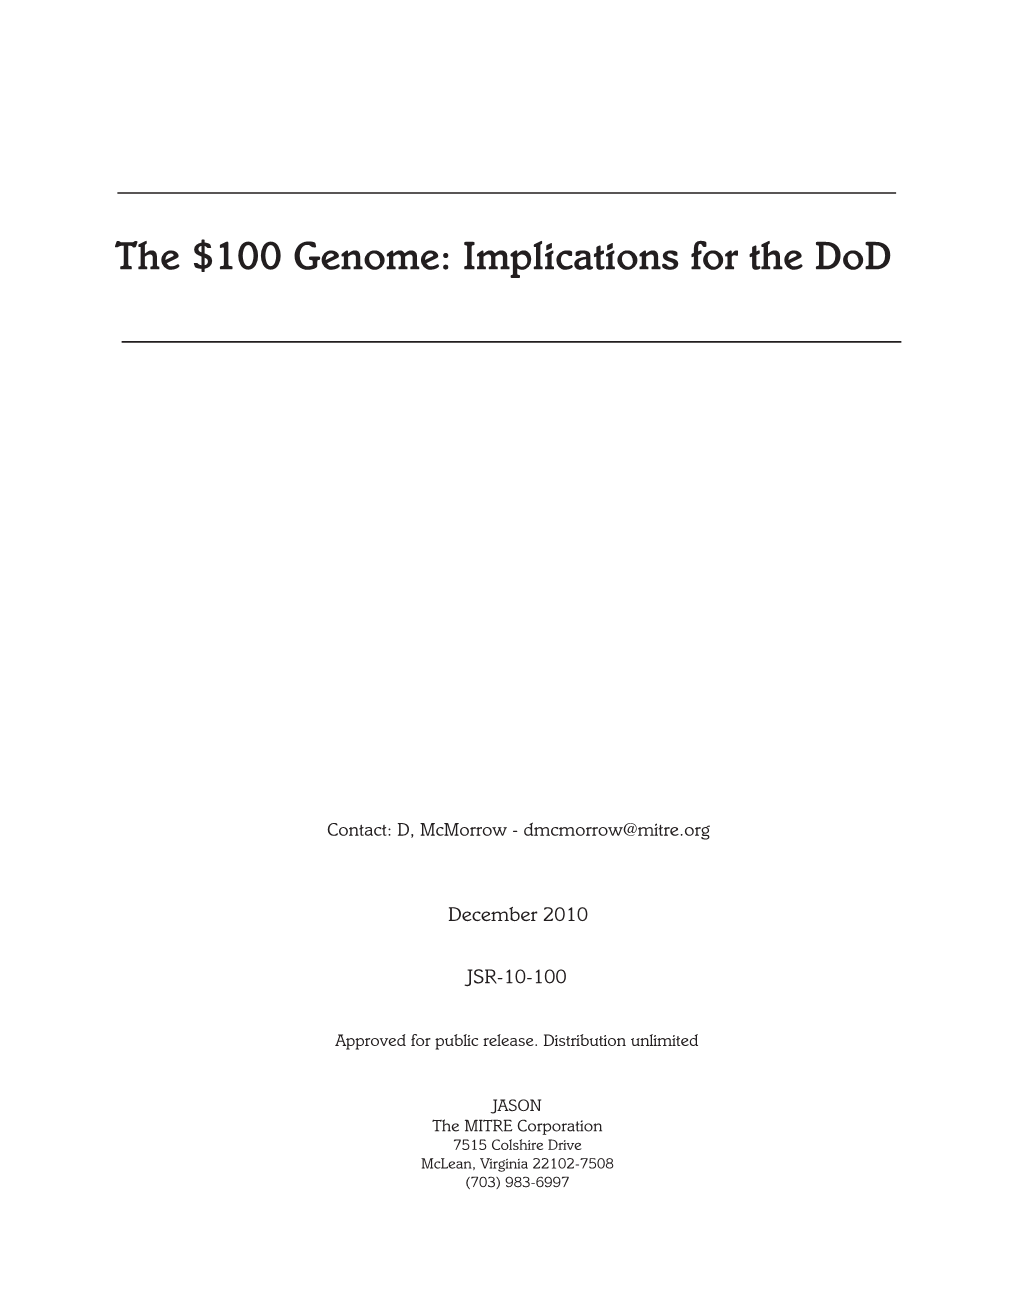 The $100 Genome: Implications for the Dod 5B